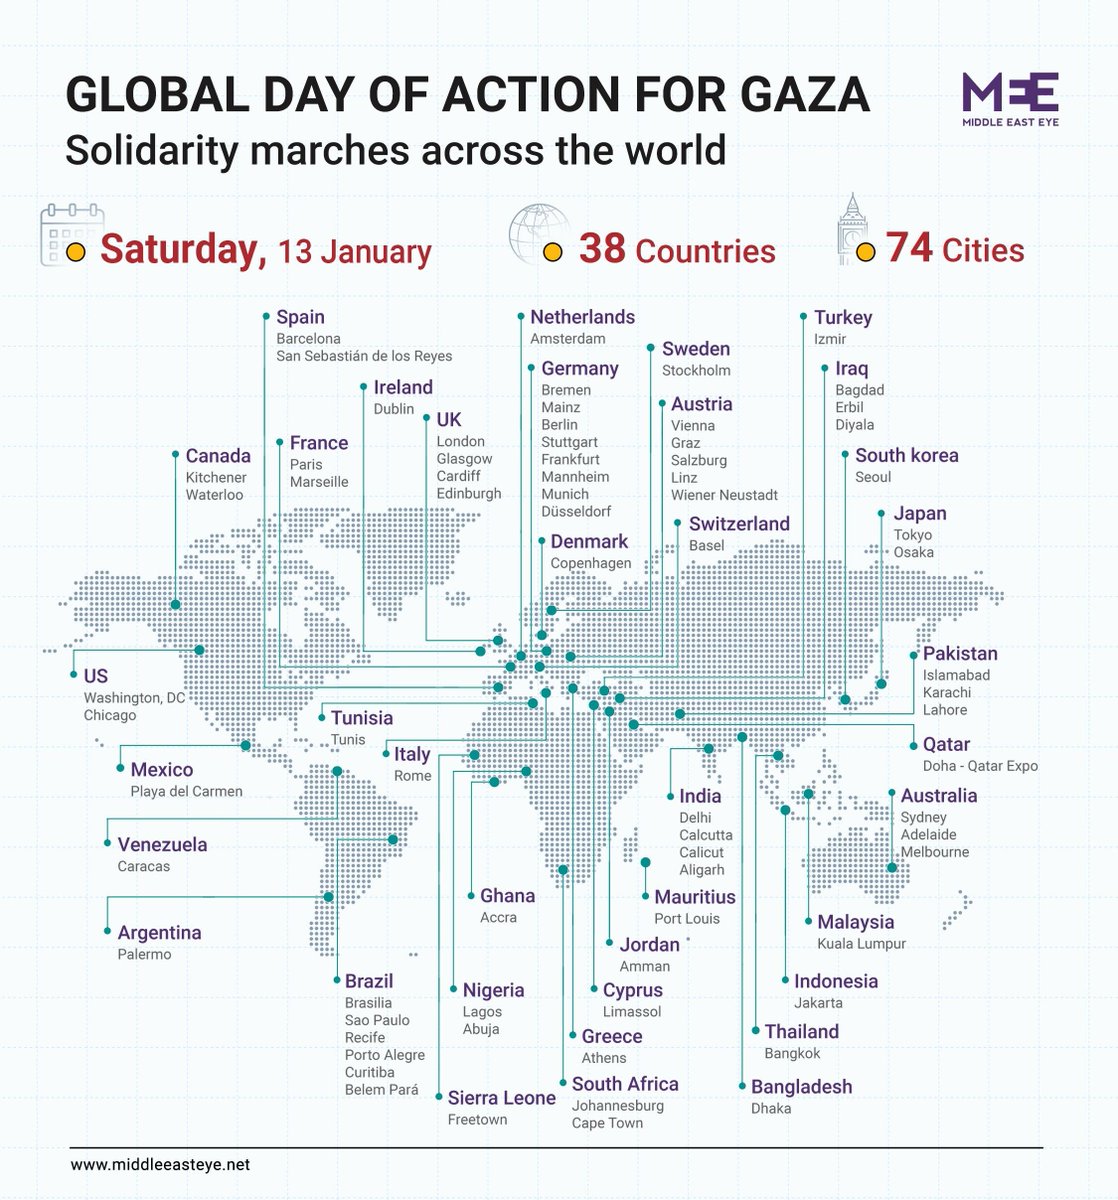 In response to the escalating humanitarian crisis in Gaza, a coalition of British organisations is spearheading a worldwide day of action on 13 January ⤵️